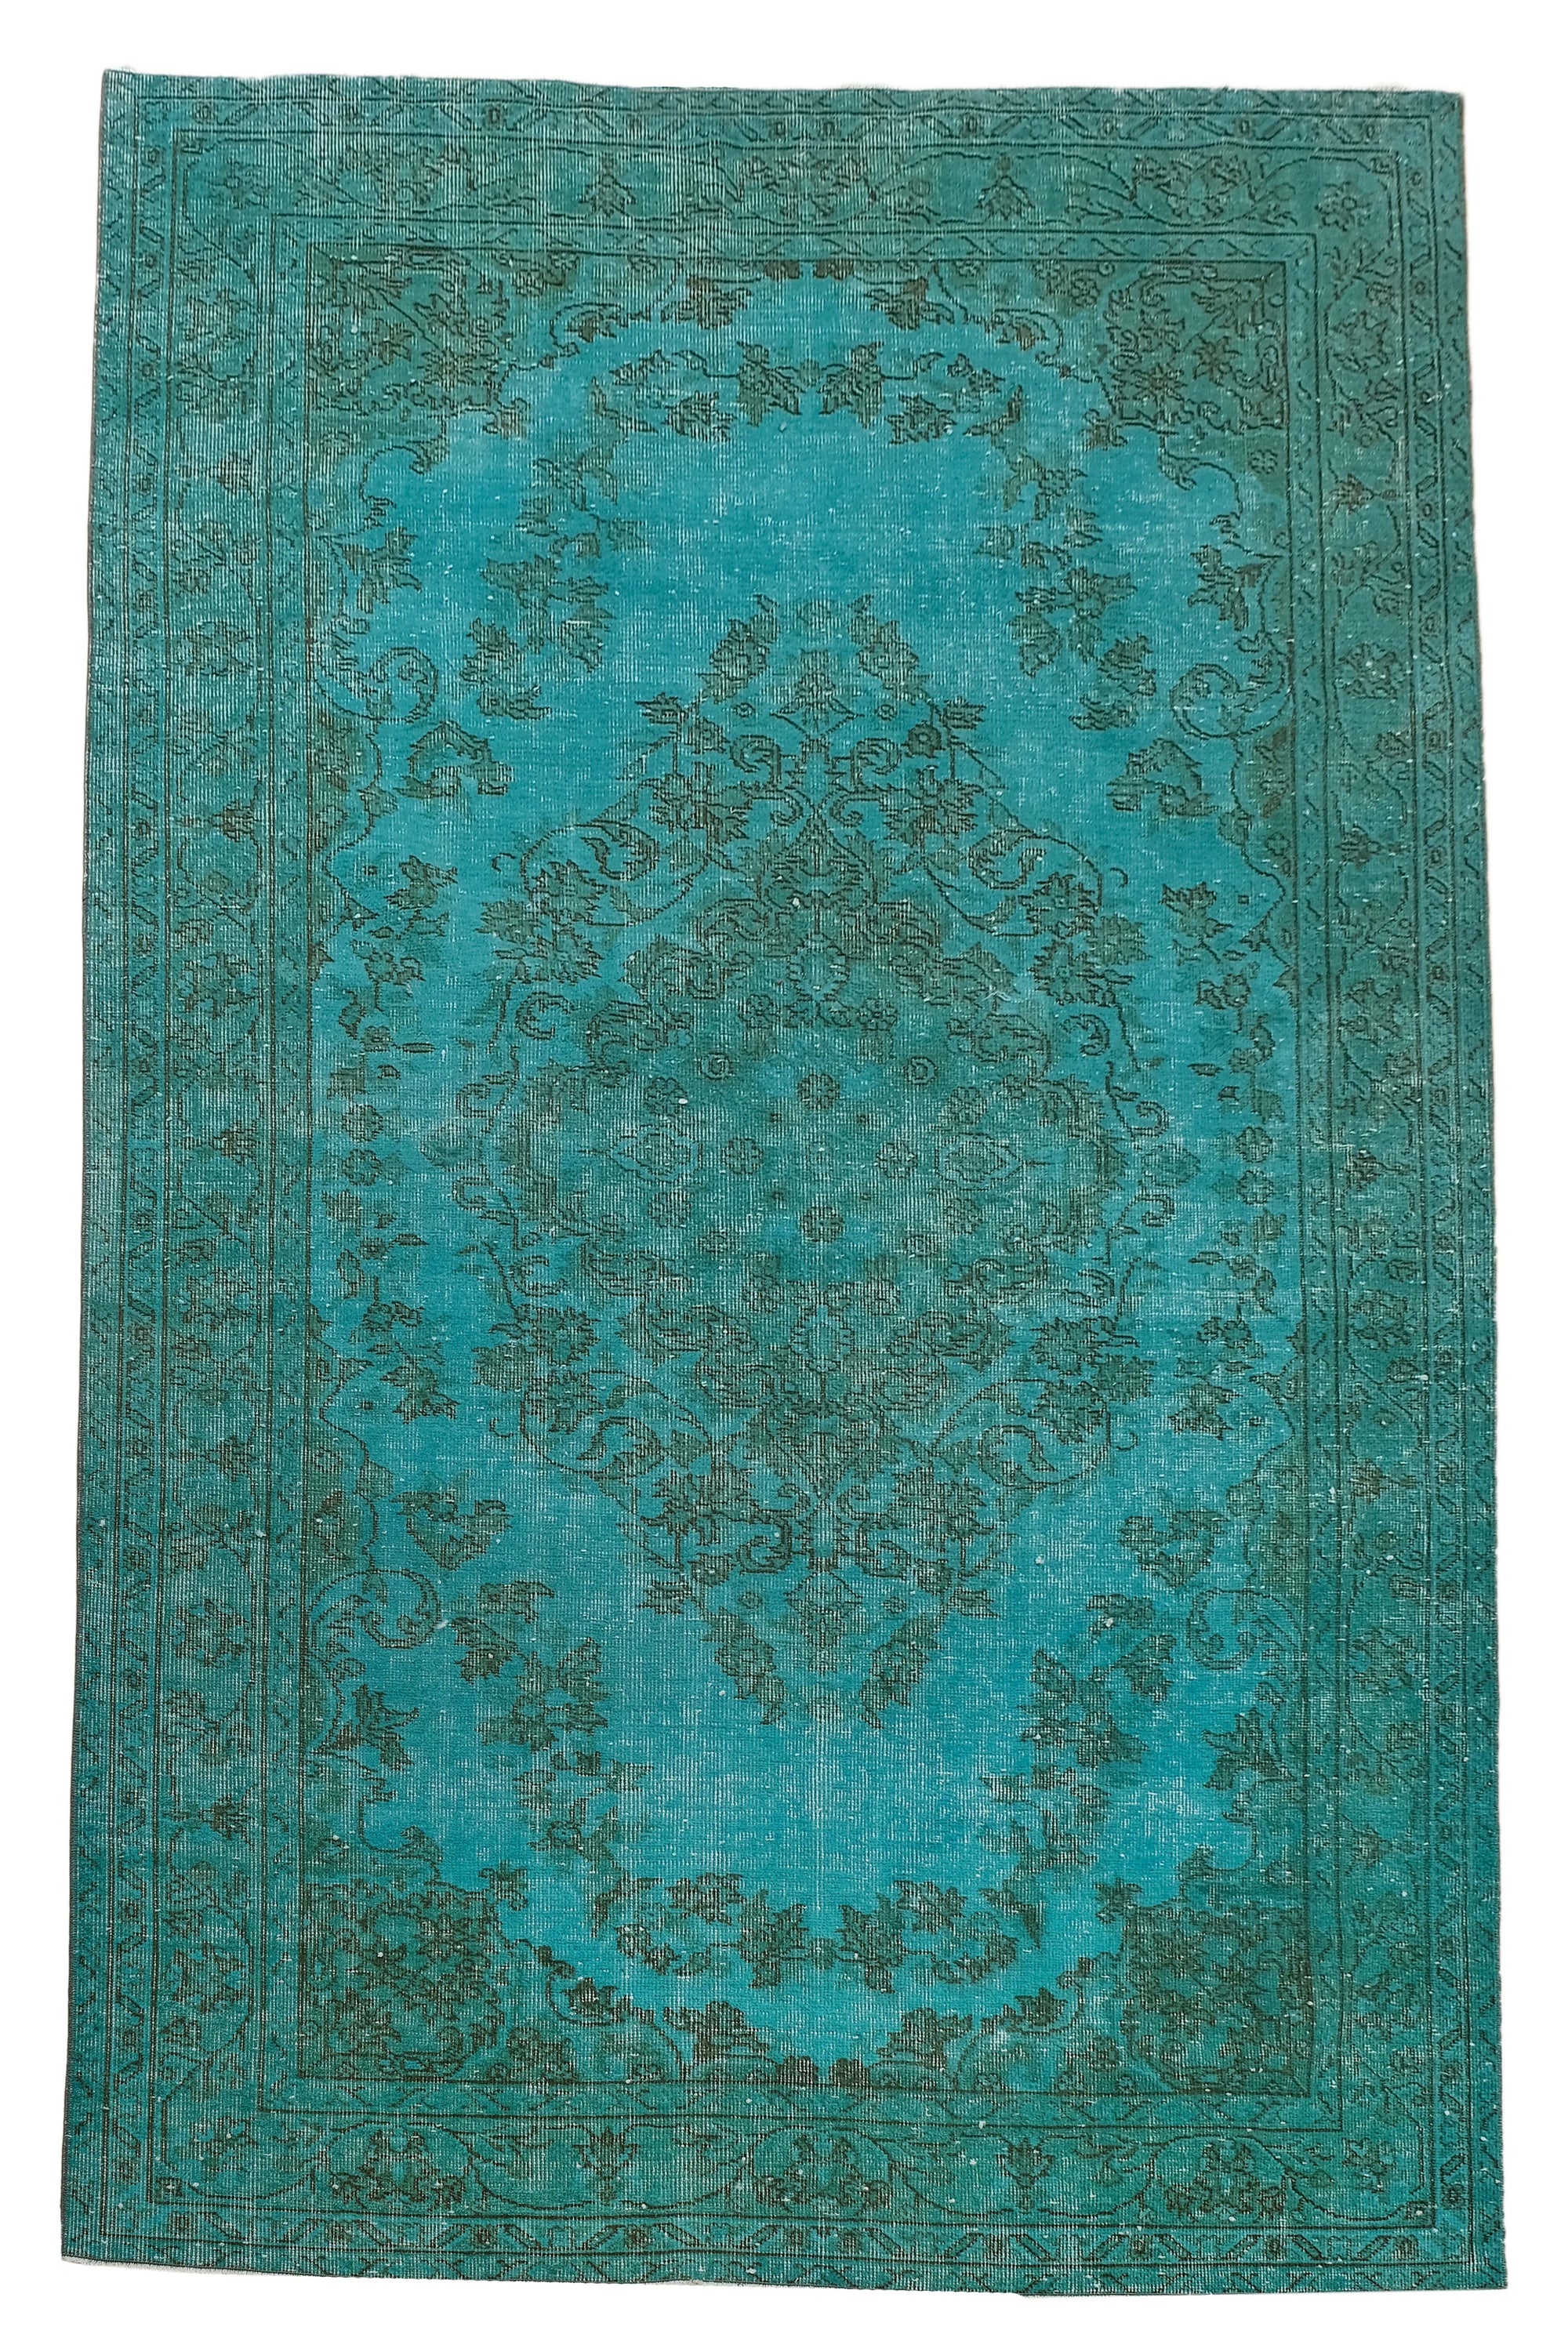 Turkish Vintage Hand-Knotted Teal Wool 166 x 257 cm (5' 5" x 8' 5")